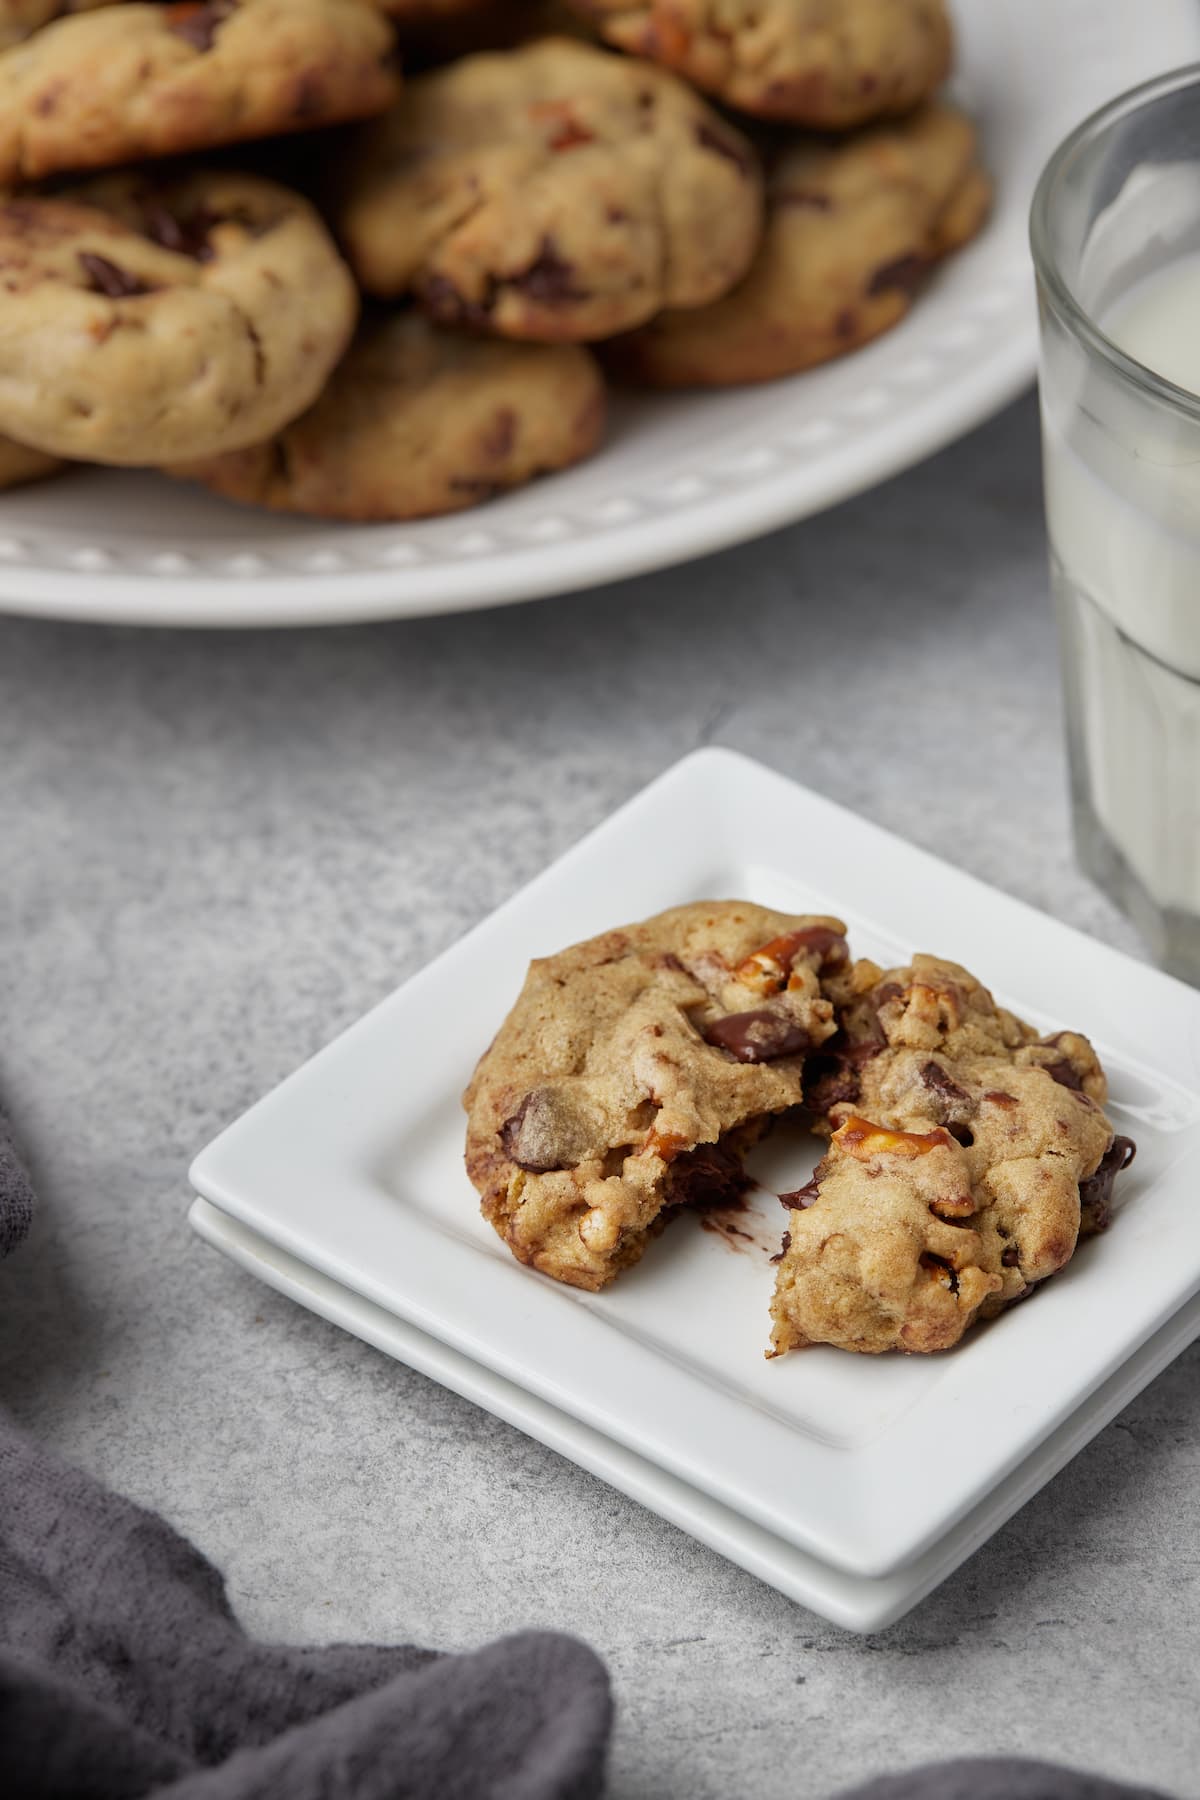 Two halves of a pretzel chocolate chip cookie on a plate next to a glass of milk and a plate full of cookies.